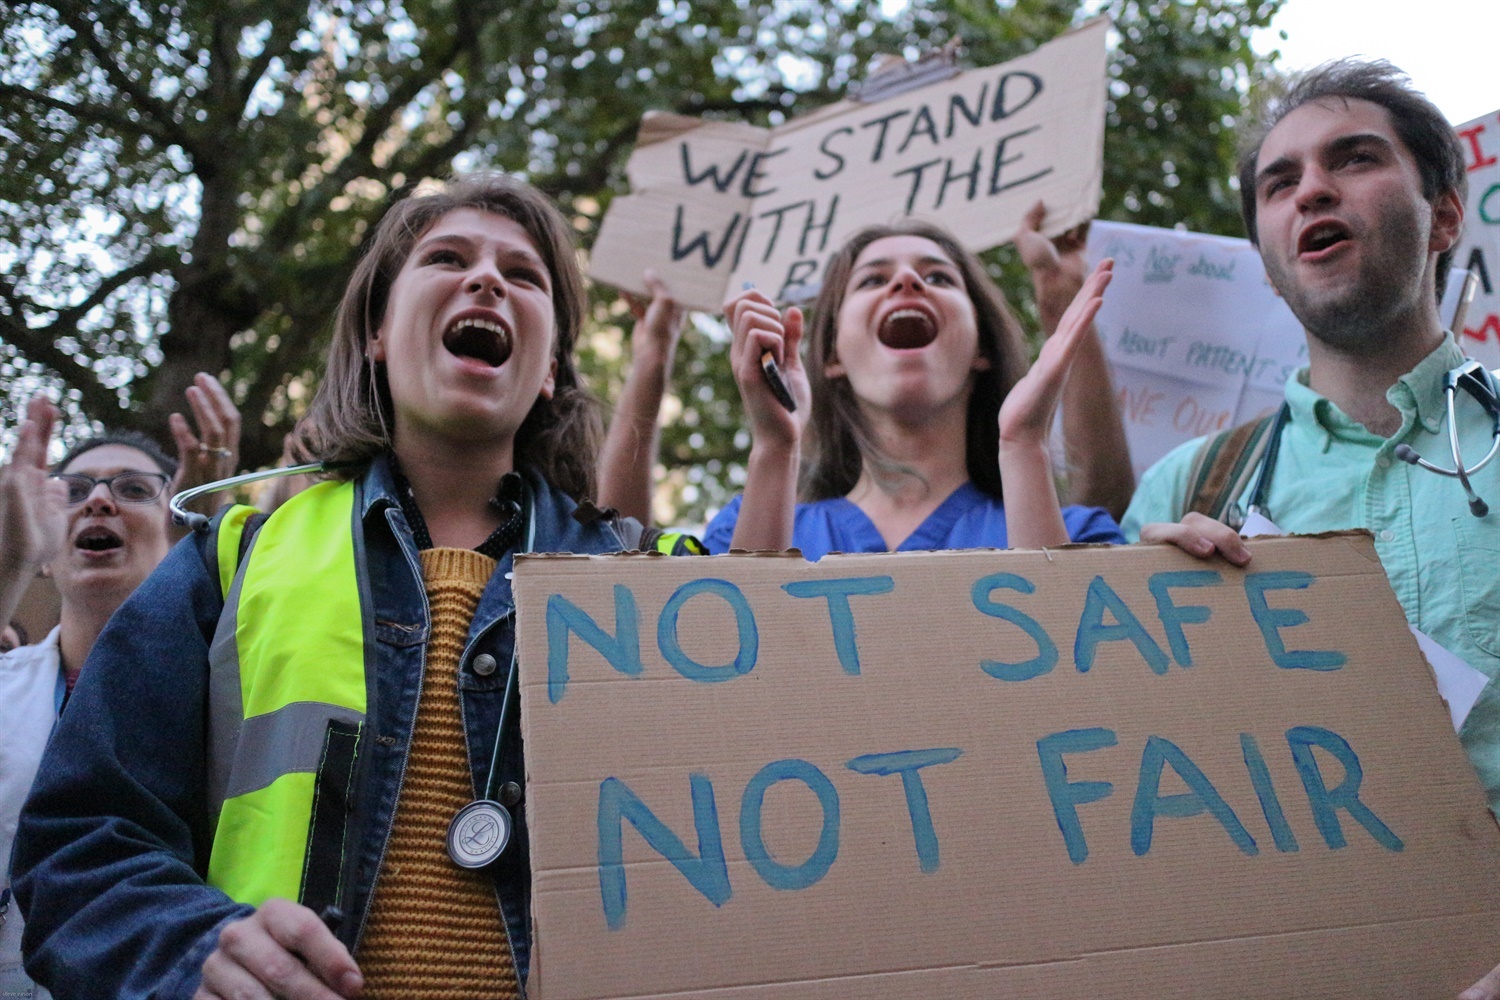 108 Not Safe - Not fair protest by doctors, junior doctors and medical students in central London 28th September 2015  7. c. Steve Eason